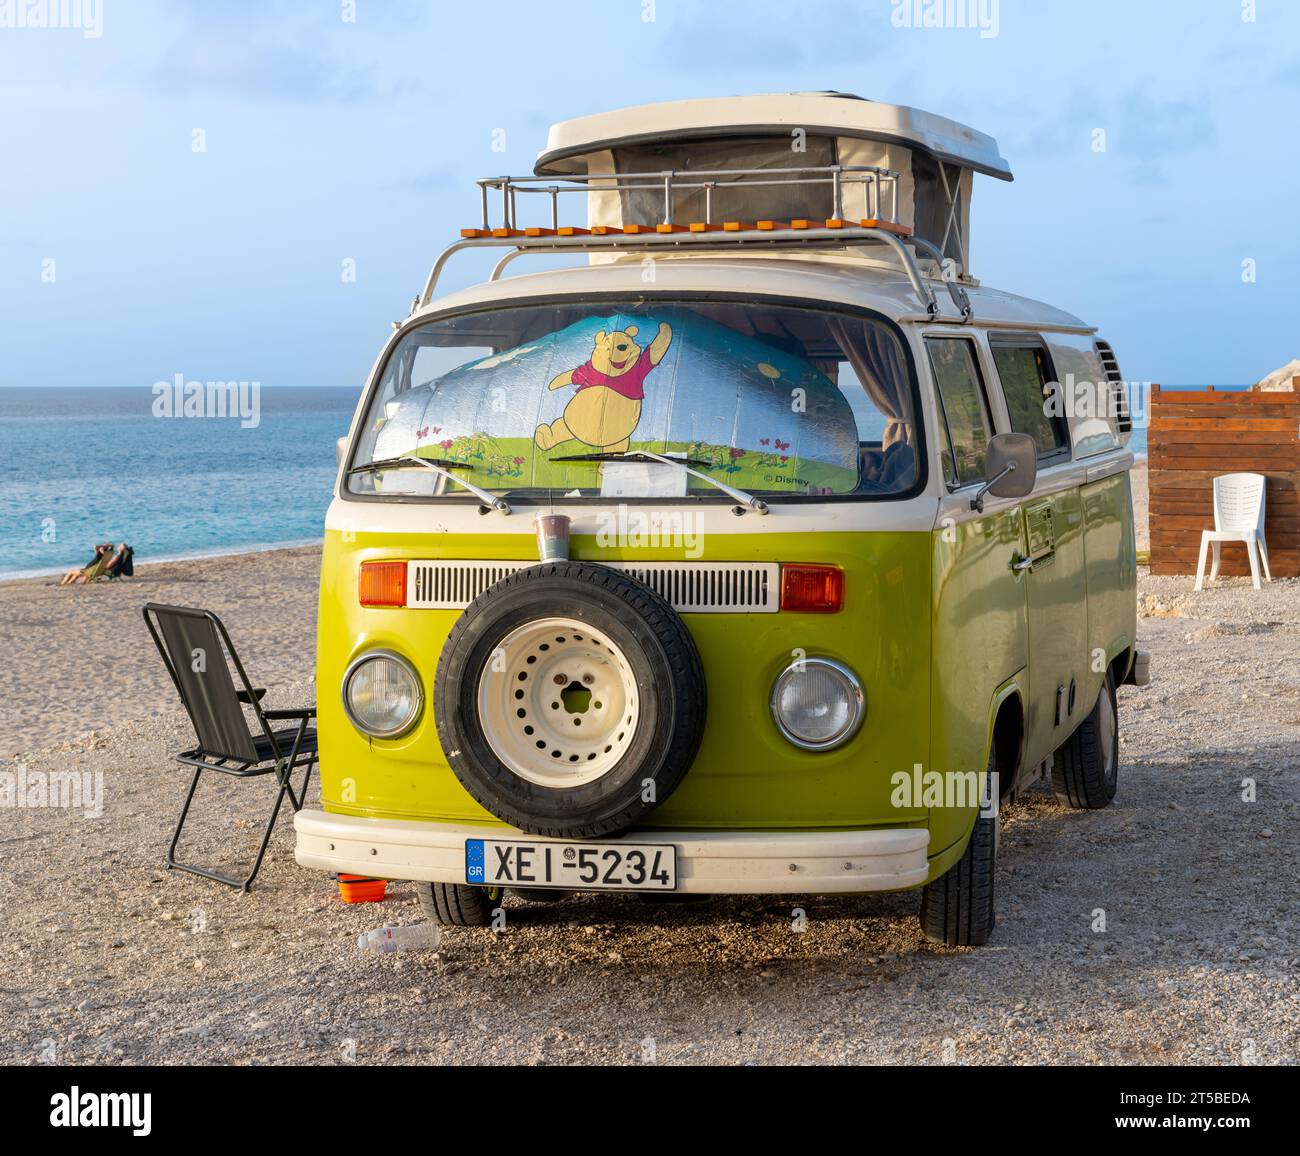 Watch A 1999 VW Transporter Play In The Sand And Water At Lokken Beach